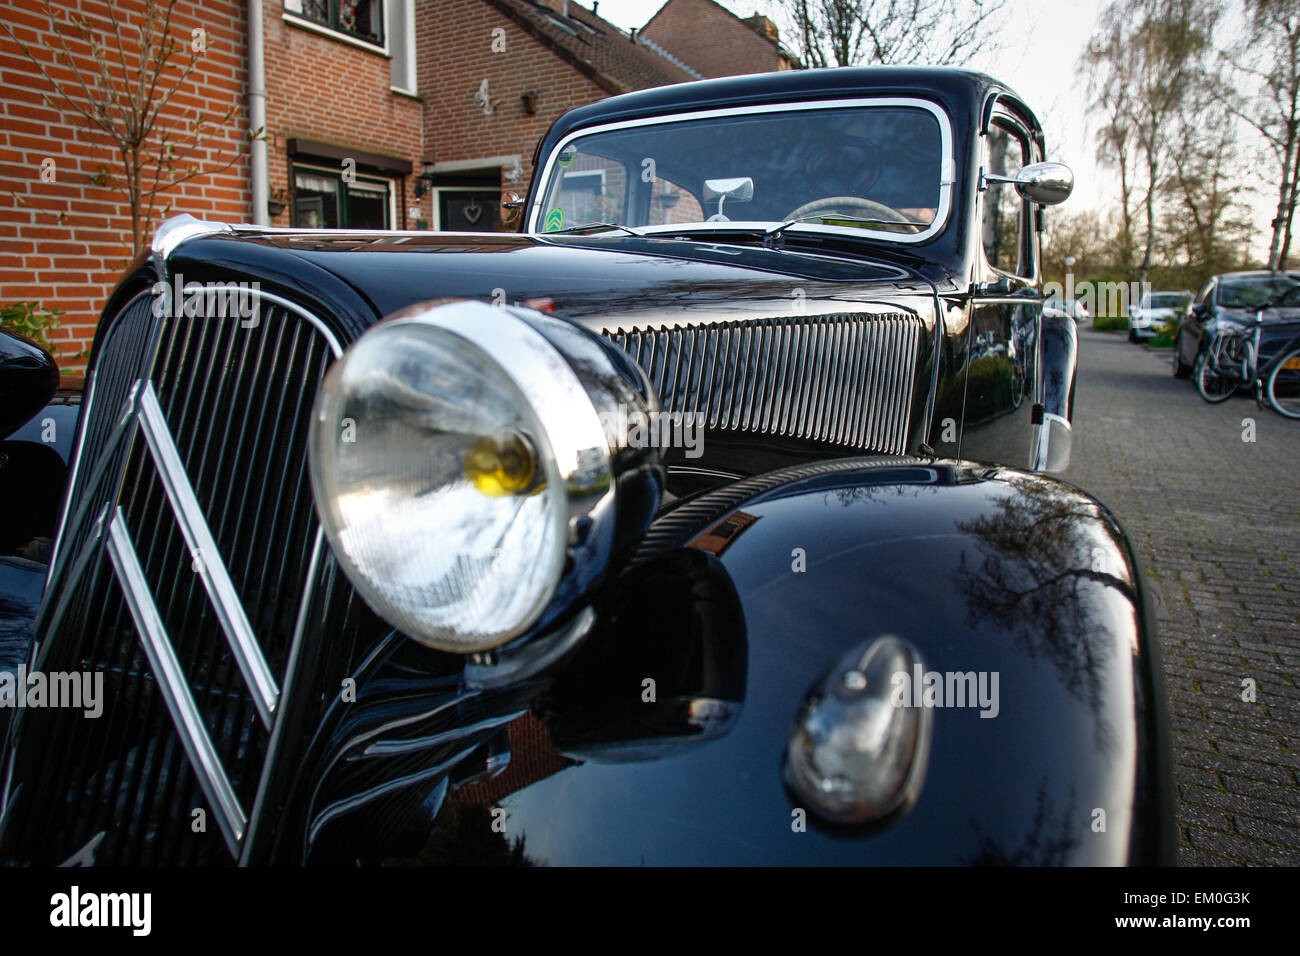 Voorschoten, Netherlands. 14th Apr, 2015. A classic Citroen car is seen in a suburban neighbourhood. It has been estimated that around a third of the oldtimer cars in the Netherlands has been disposed off or sold since new tax laws defining classic cars for which no tax is required as older than 40 years. Previously this was 25 years. Credit:  Willem Arriens/Alamy Live News Stock Photo